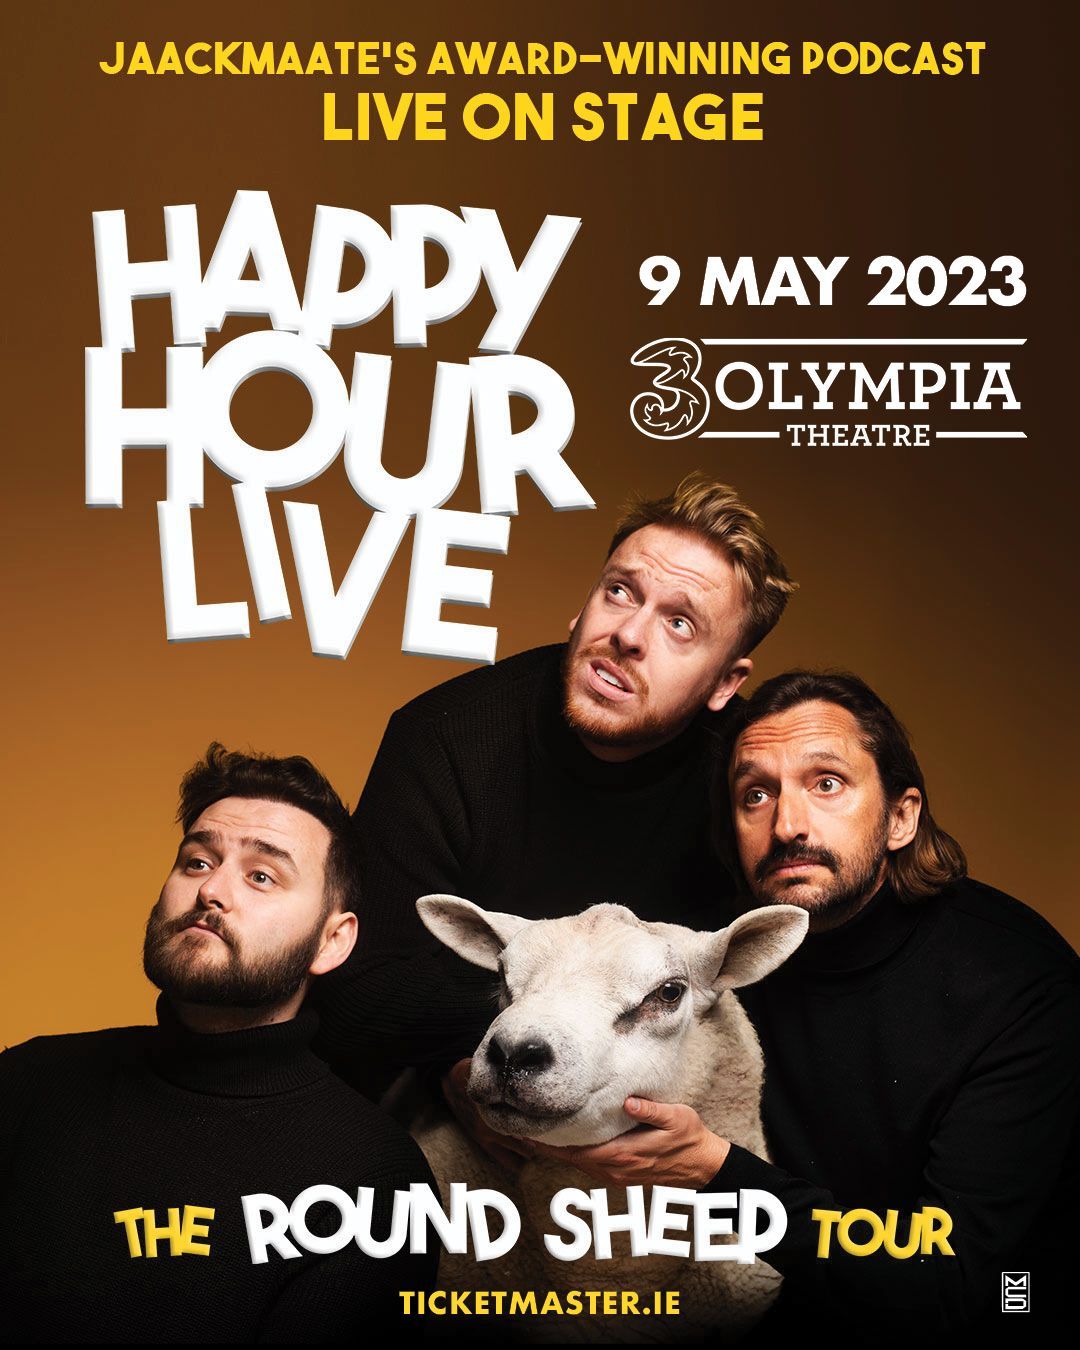 JAACKMAATE’S HAPPY HOUR PODCAST LIVE DUBLIN, 3Olympia Theatre 09 May 2023